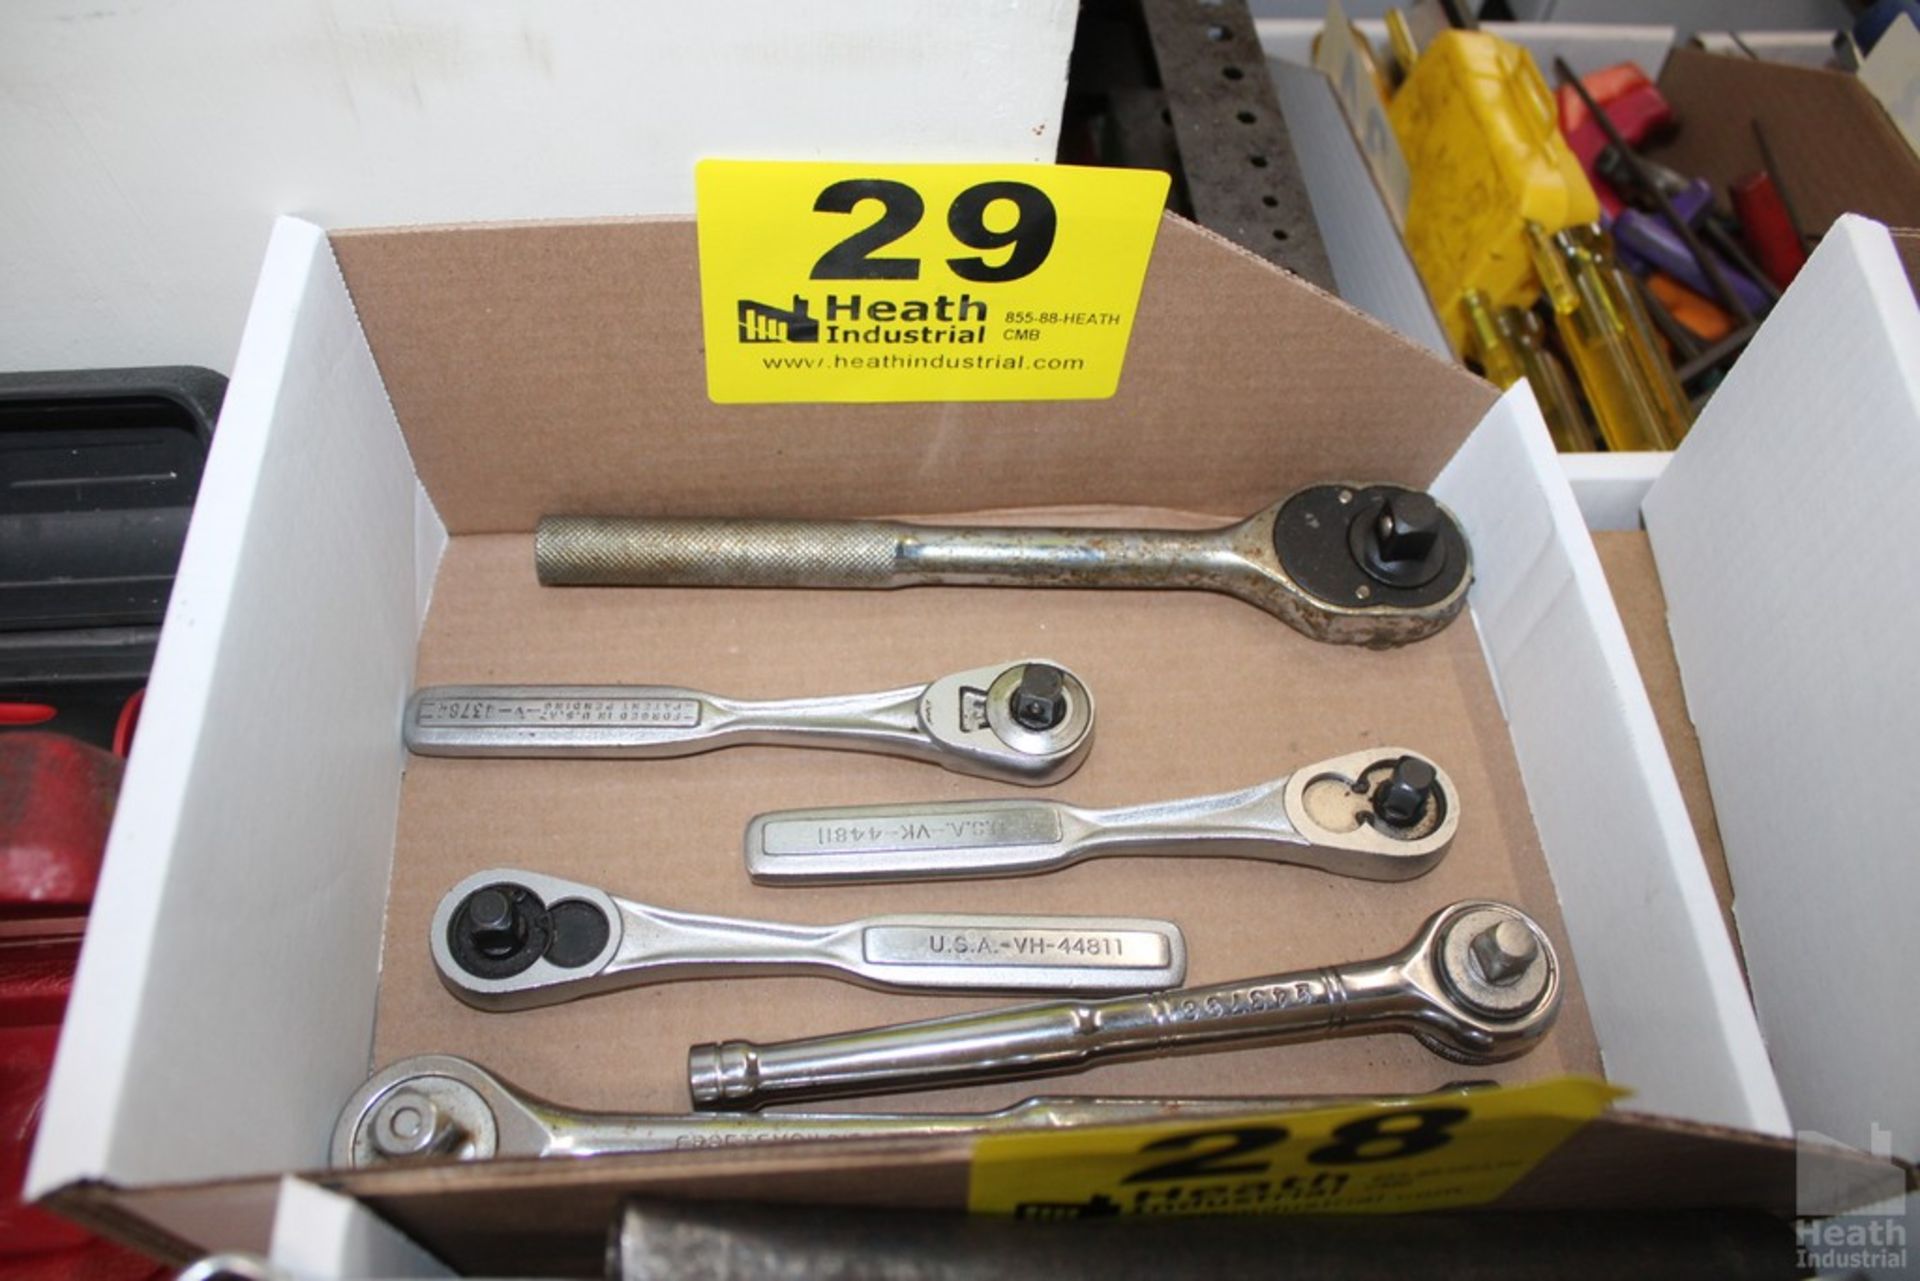 (6) 1/2" AND 3/8" DRIVE RATCHETS IN BOX